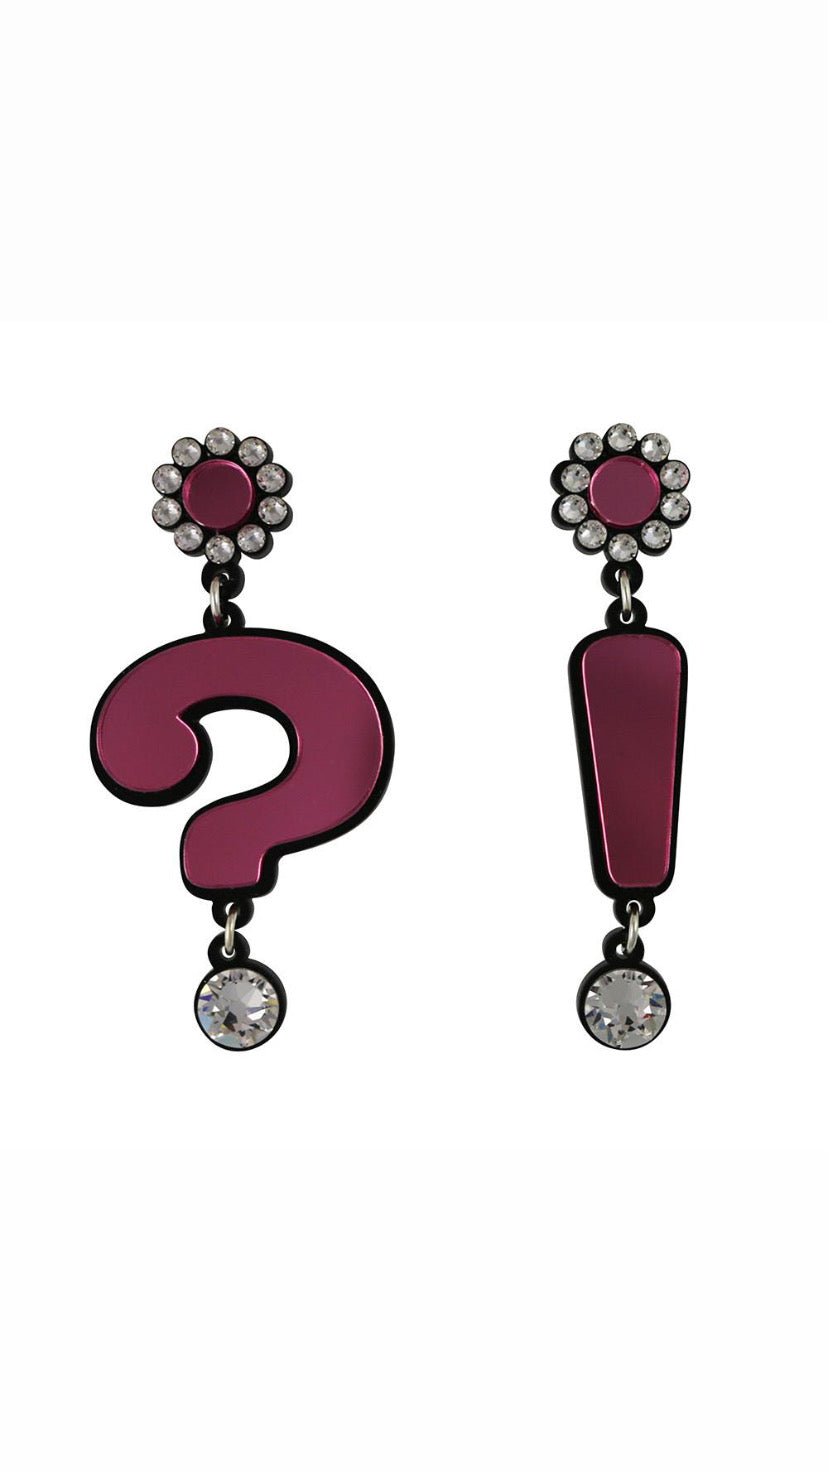 Question Mark Exclamation Point Earrings in Pink